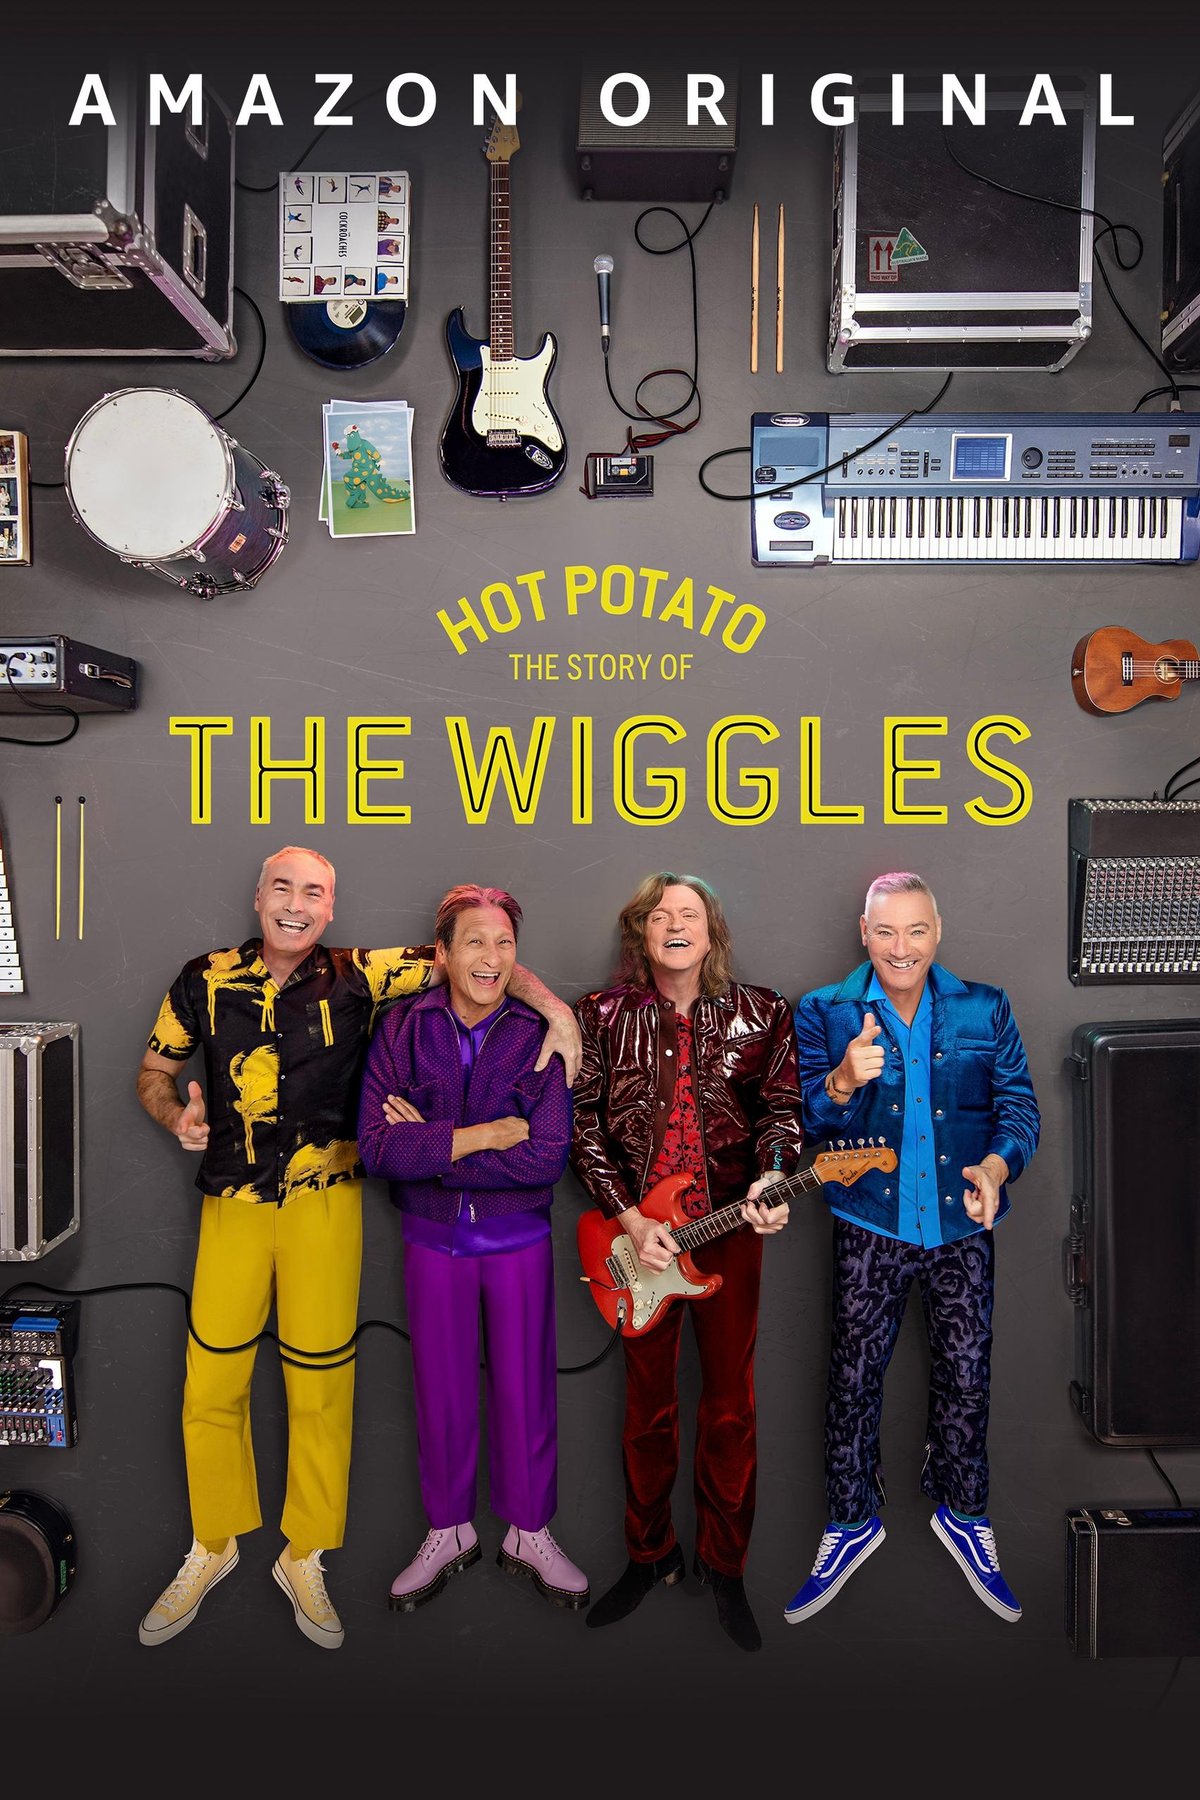 Hot Potato: The Story of the Wiggles, Age Rating and Content Warning